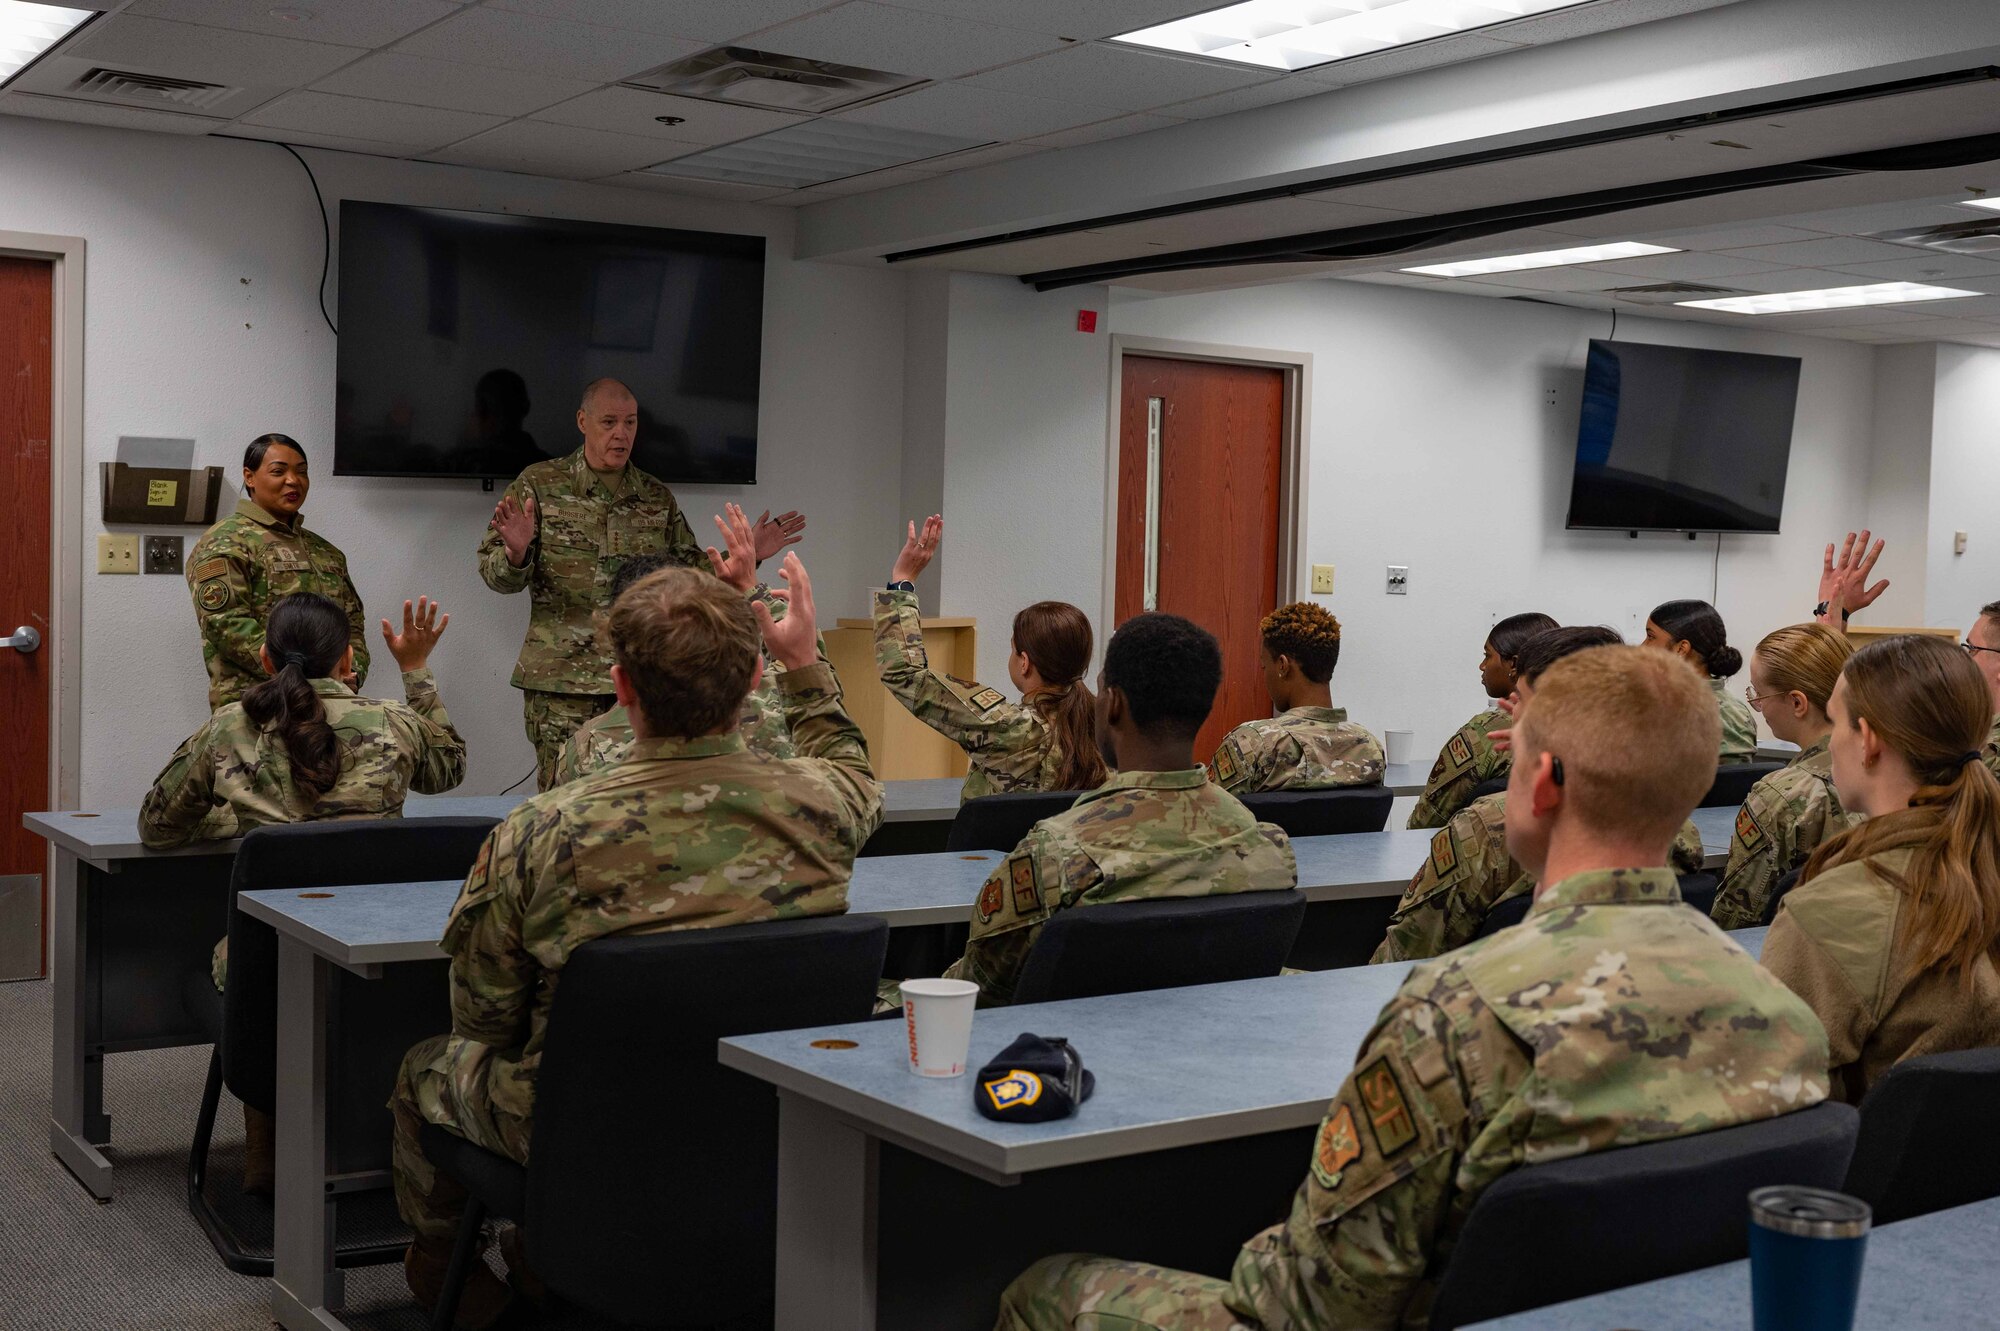 Air Force Global Strike Command leaders talk to security forces Airmen.